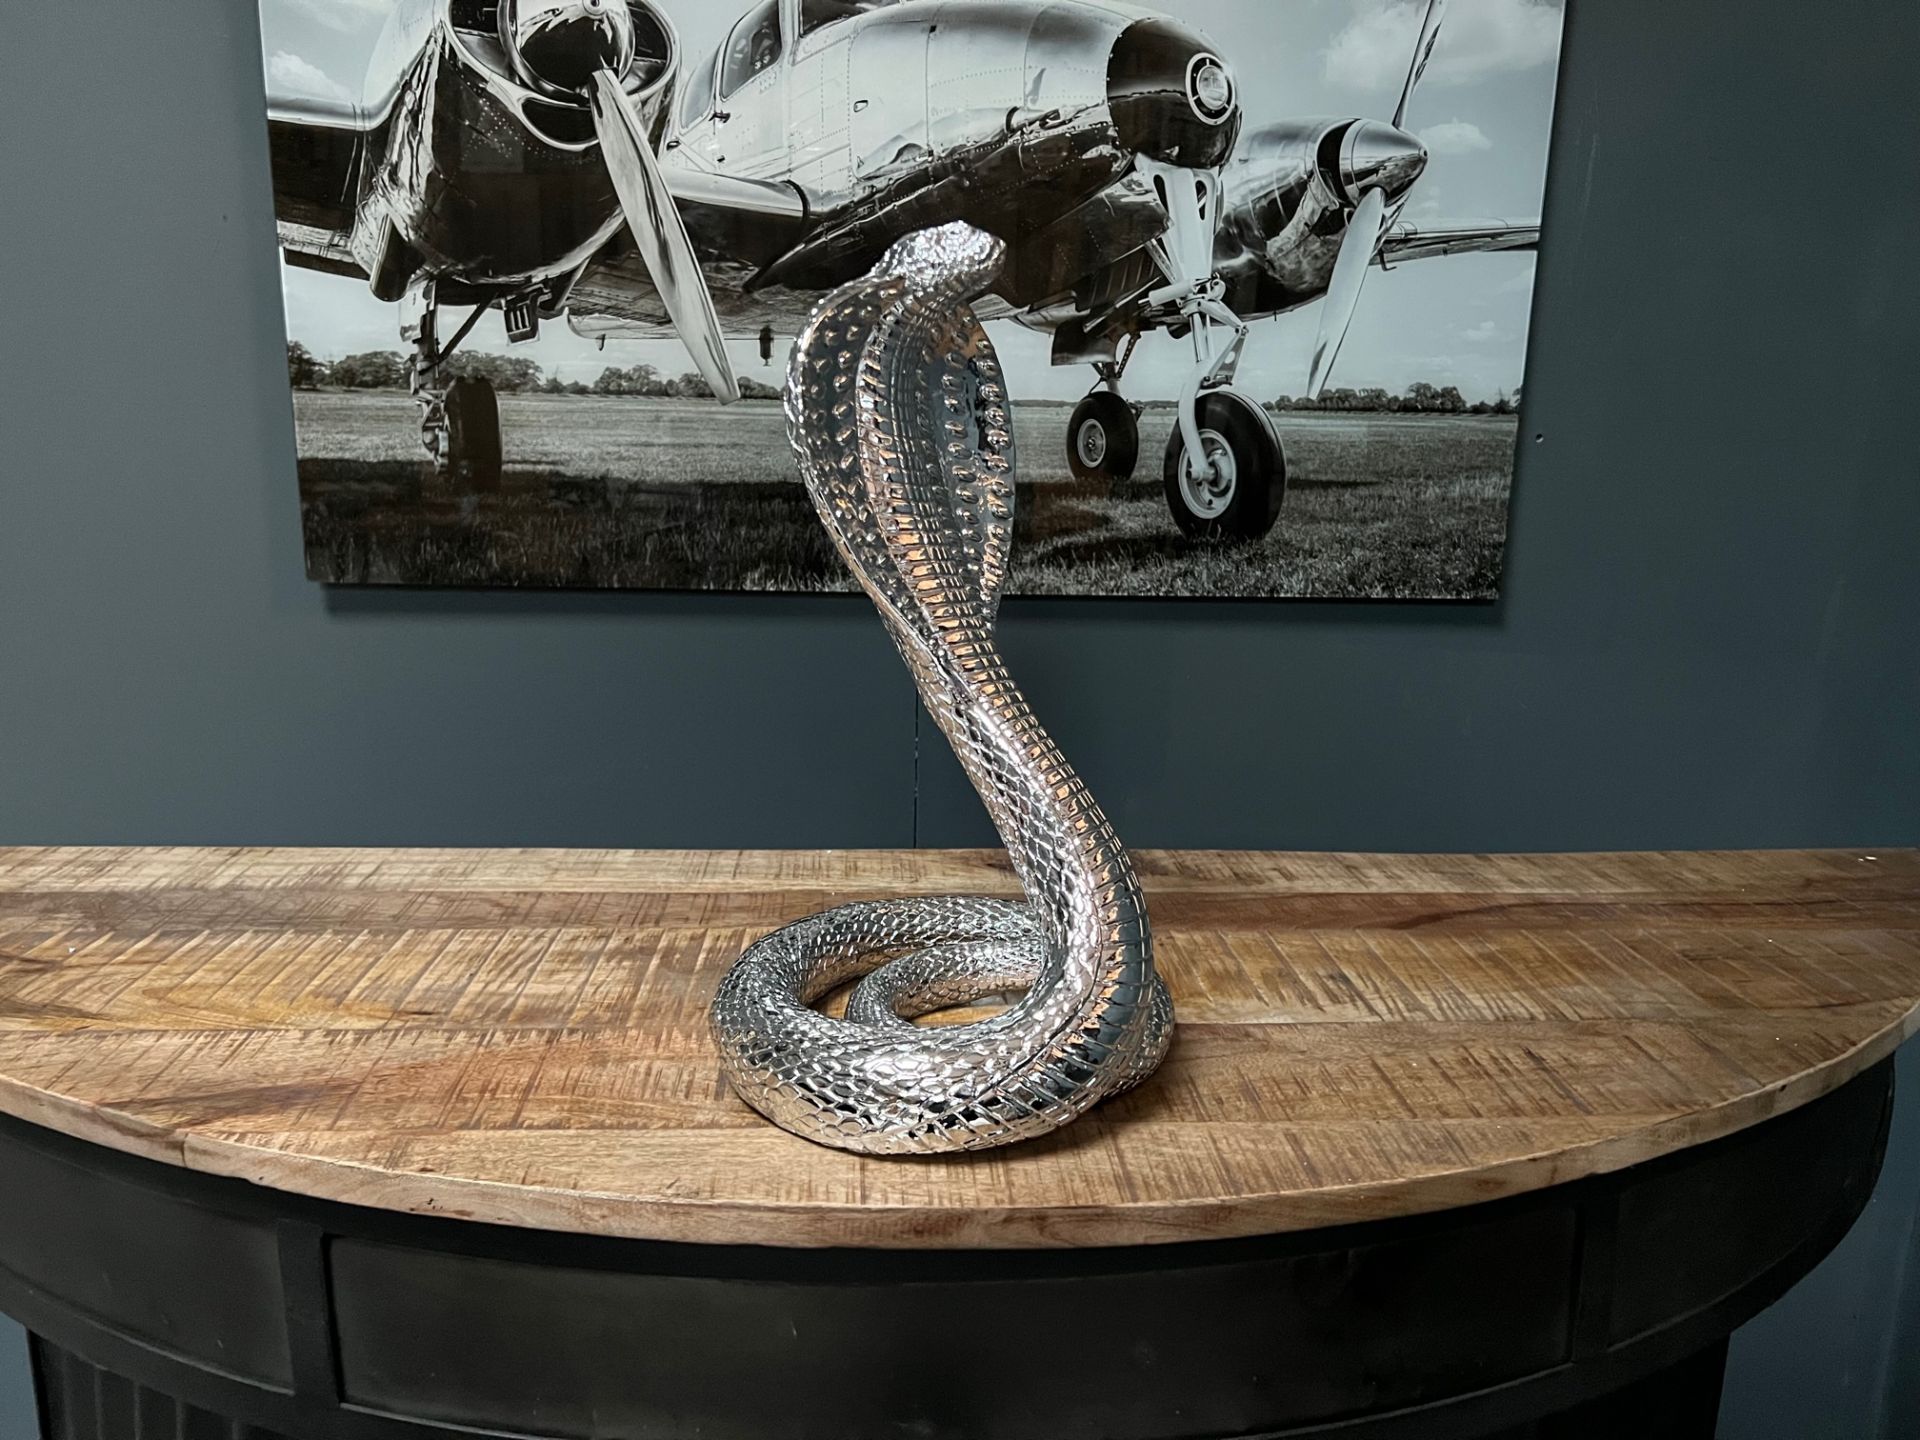 New Boxed Large Silver Resin Snake Statue - Image 3 of 6